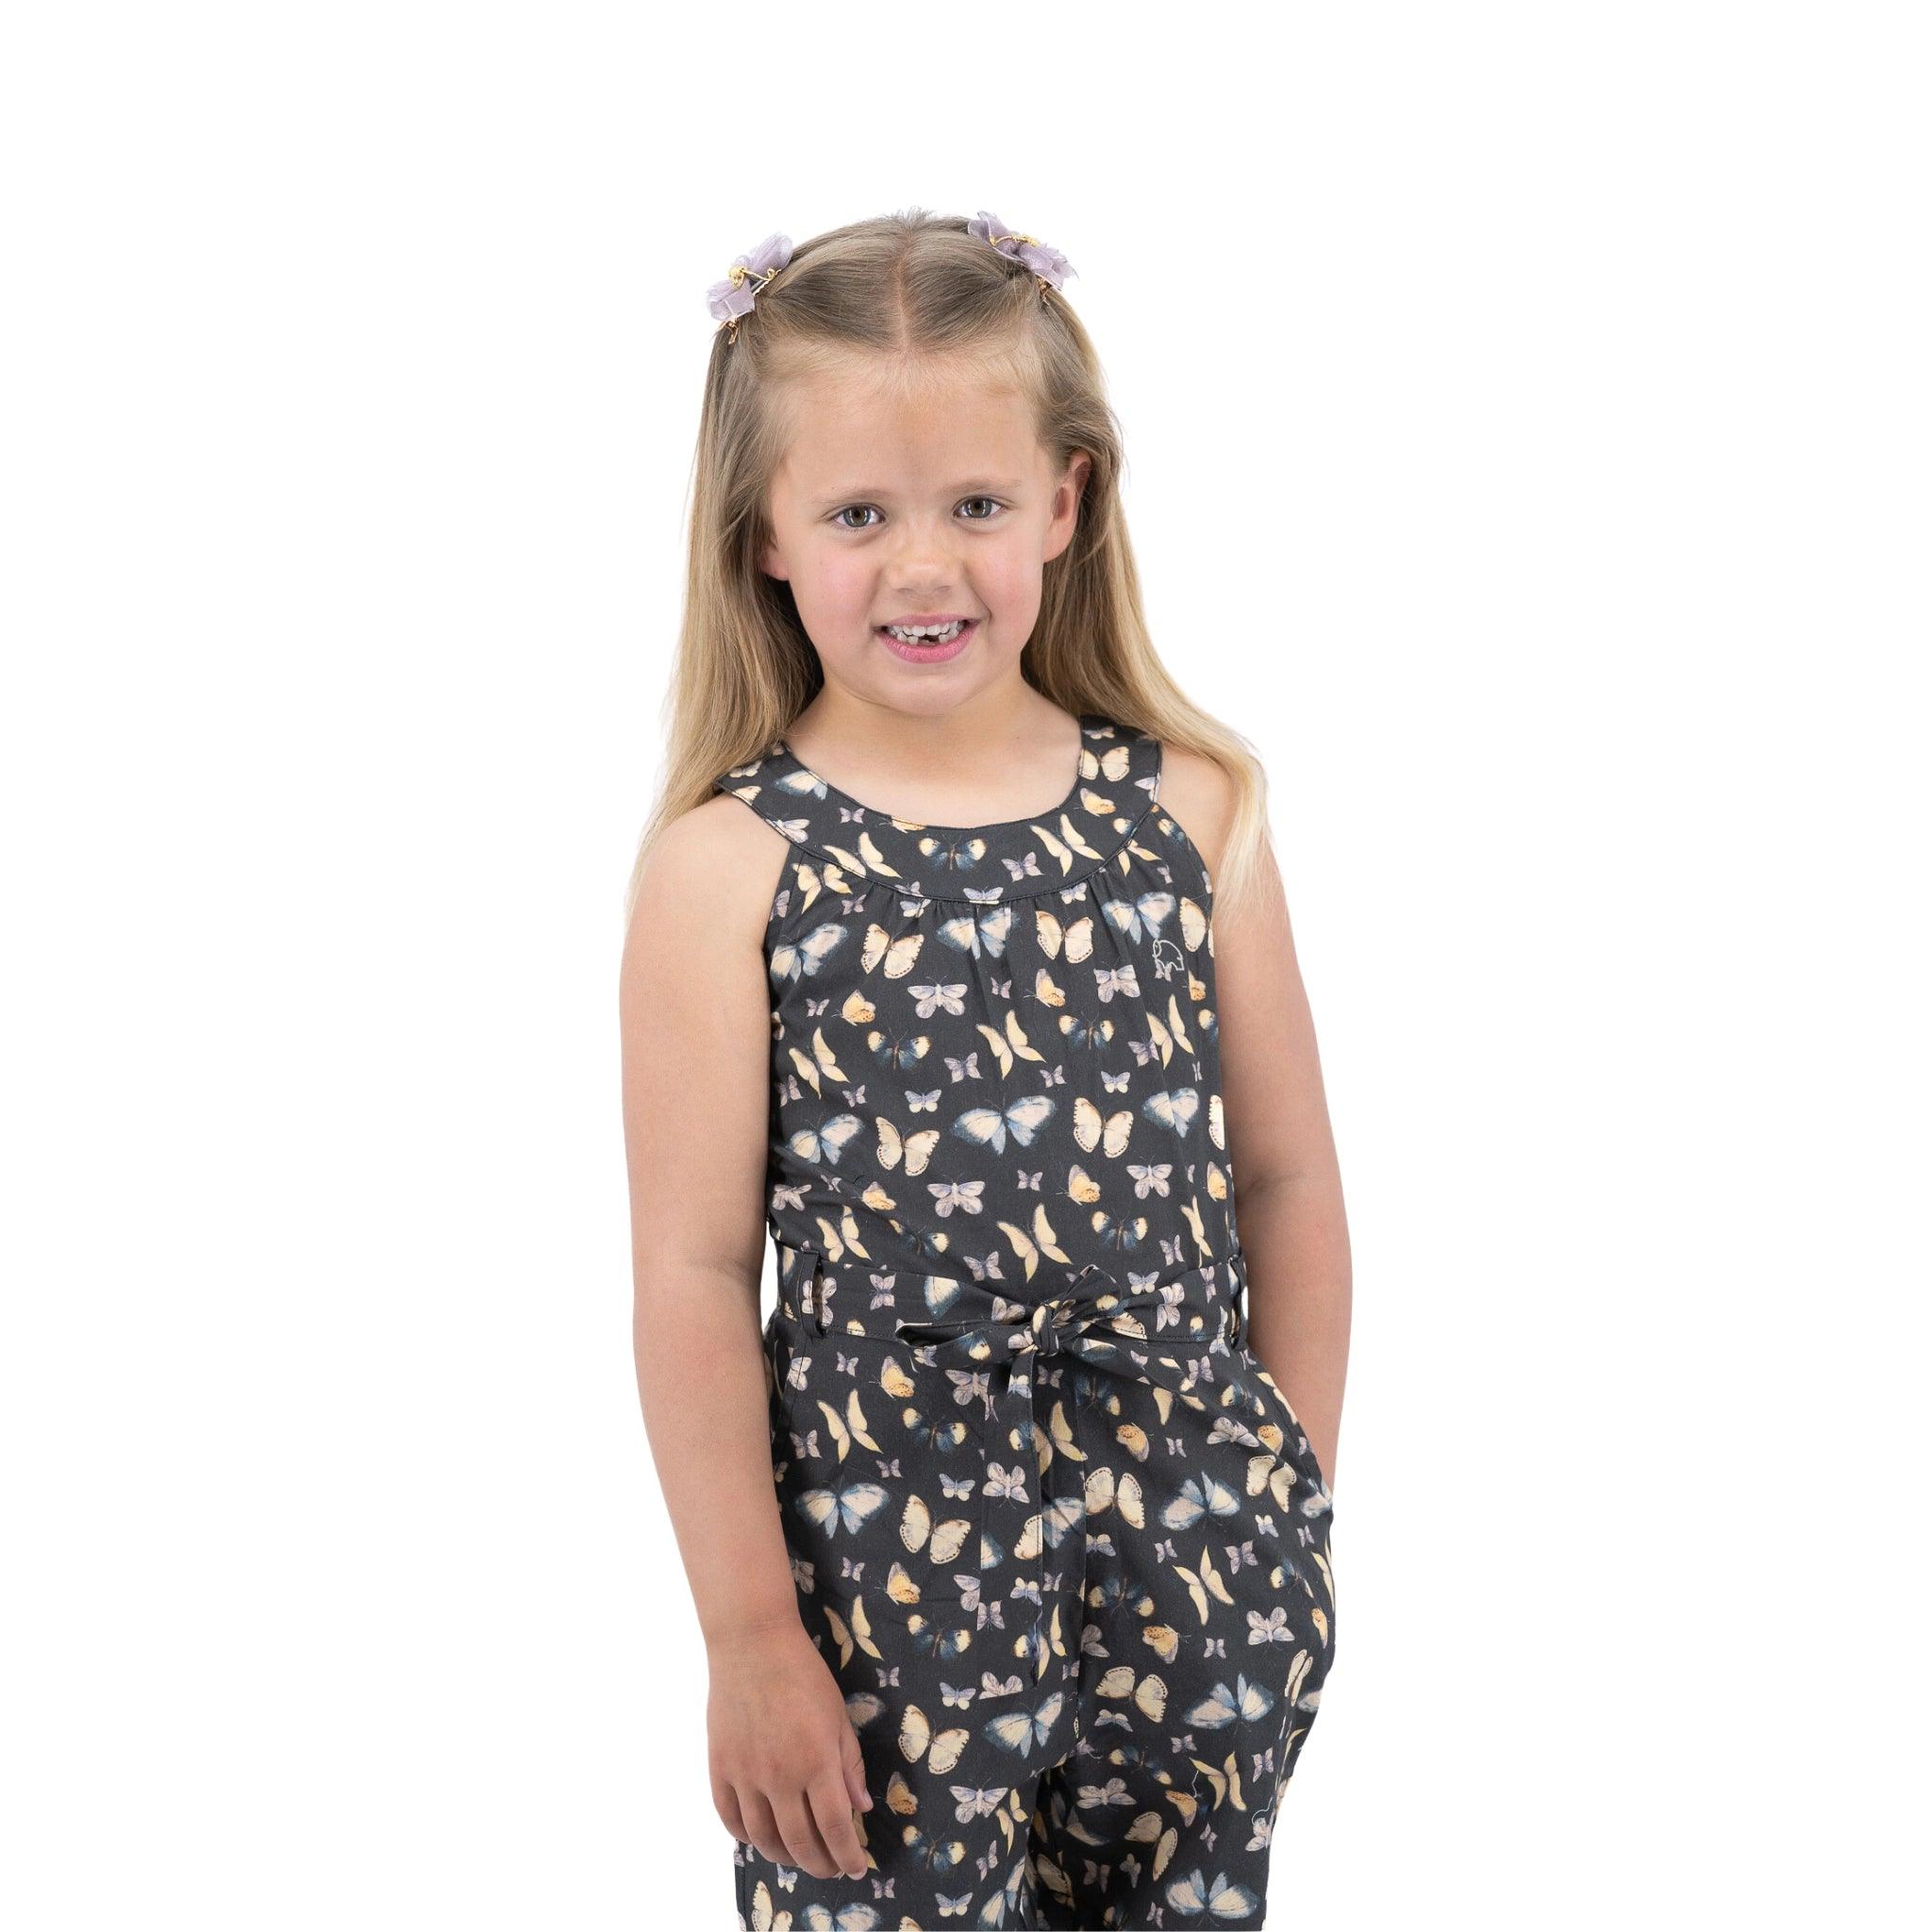 A young girl with floral hair accessories, smiling in a sleeveless butterfly print jumpsuit with a waist belt, standing against a white background. She is wearing the Karee Pirate Black Adventure-ready Cotton Play Suit.